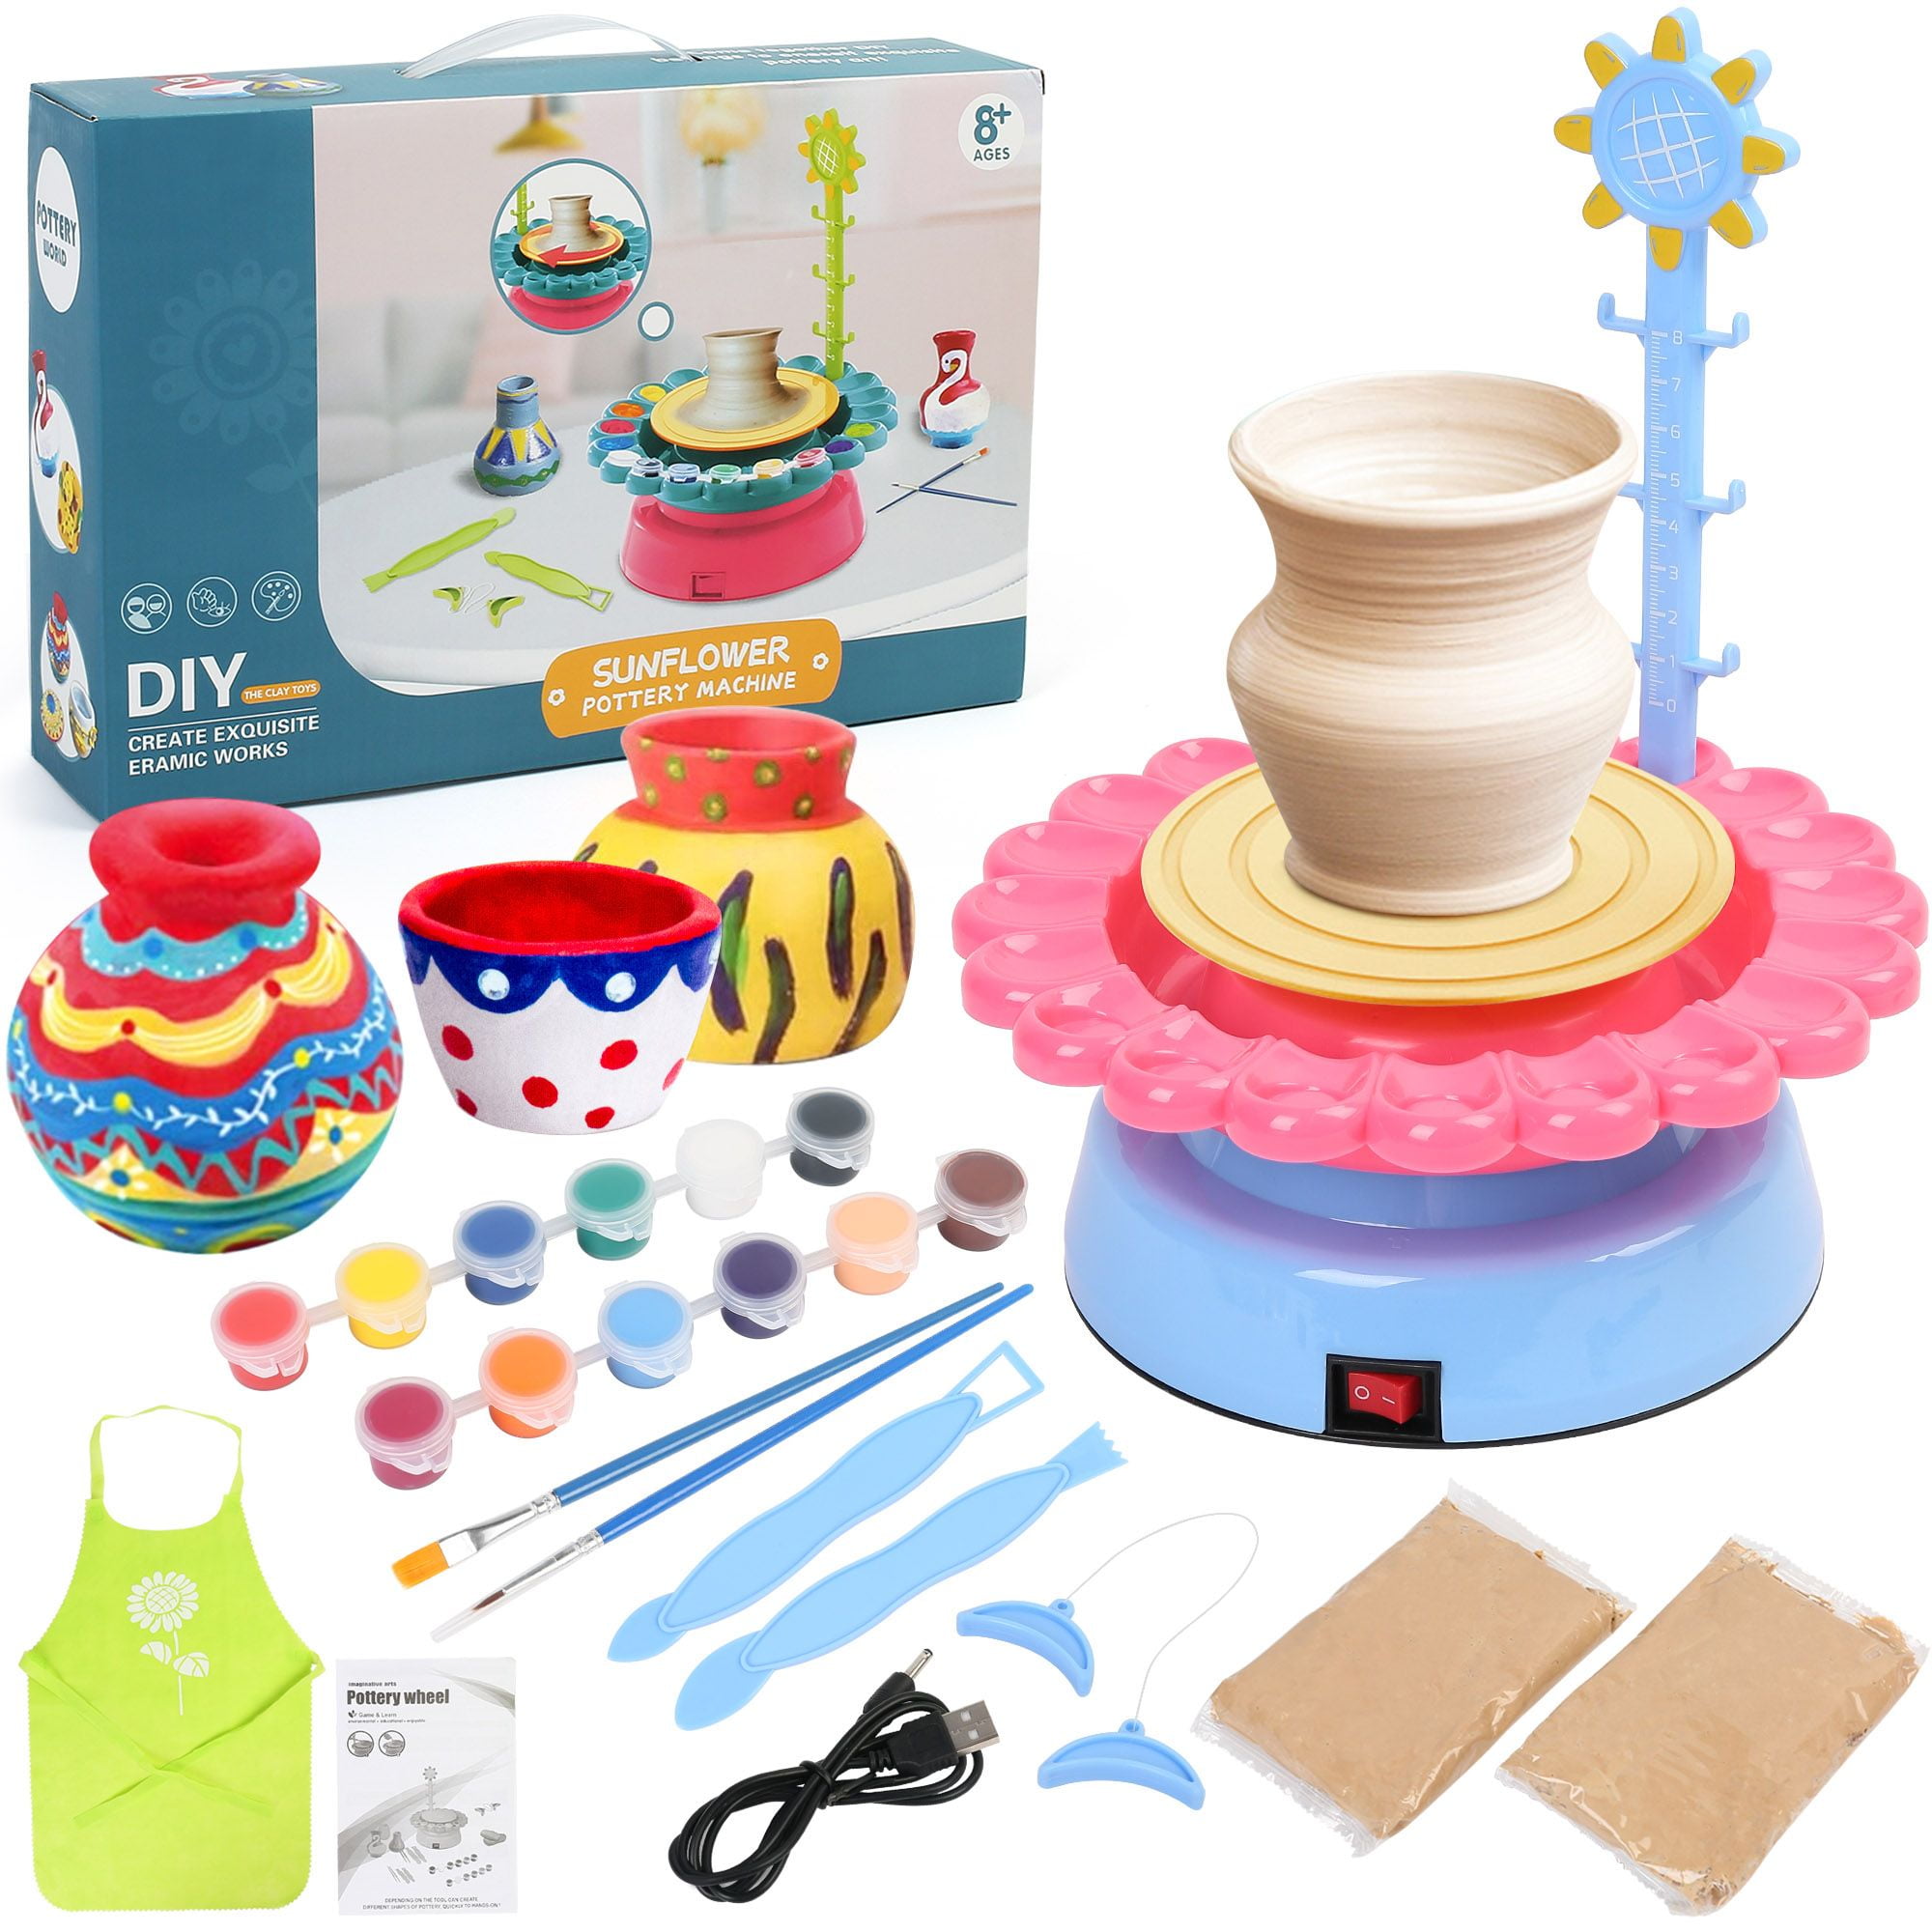 Pottery Wheel, Desk DIY Pottery Studio, Art Craft Kit, Craft Activity,  Artist Studio, Ceramic Machine with Air-Dry Clay, Educational Toy for Kids